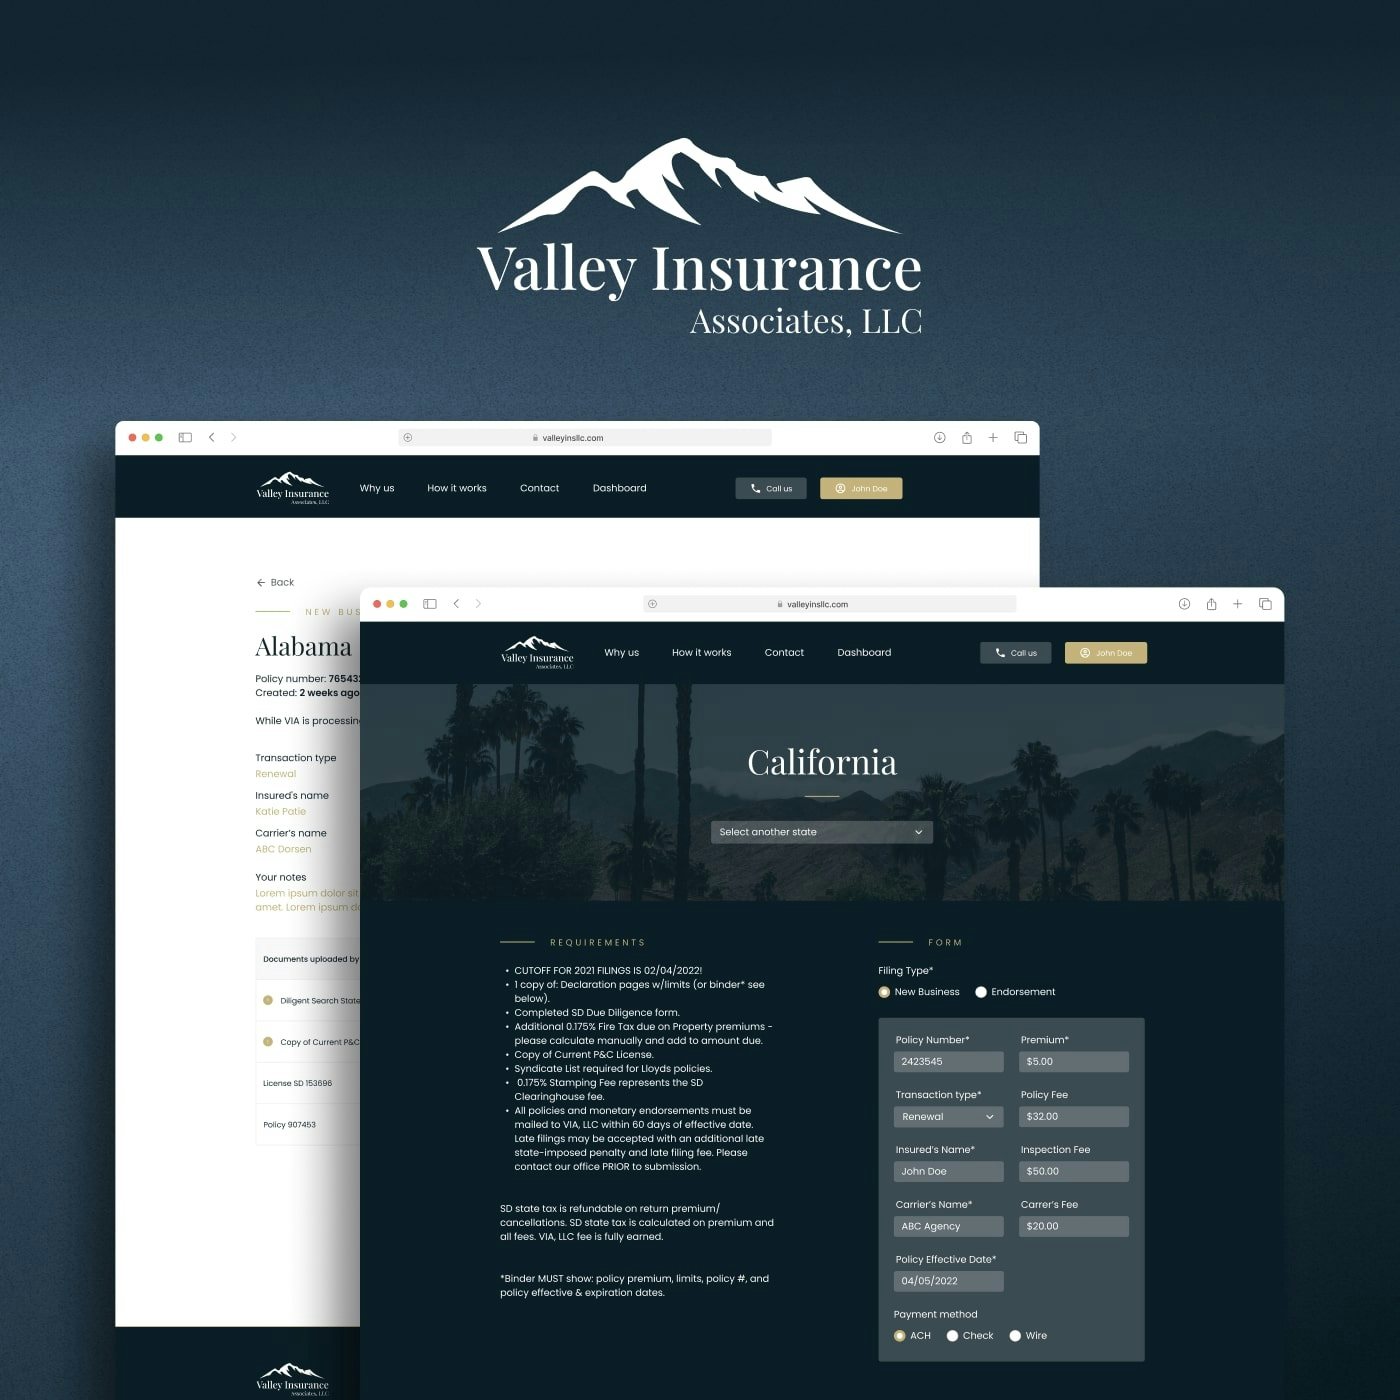 UIs of a website for an insurance company